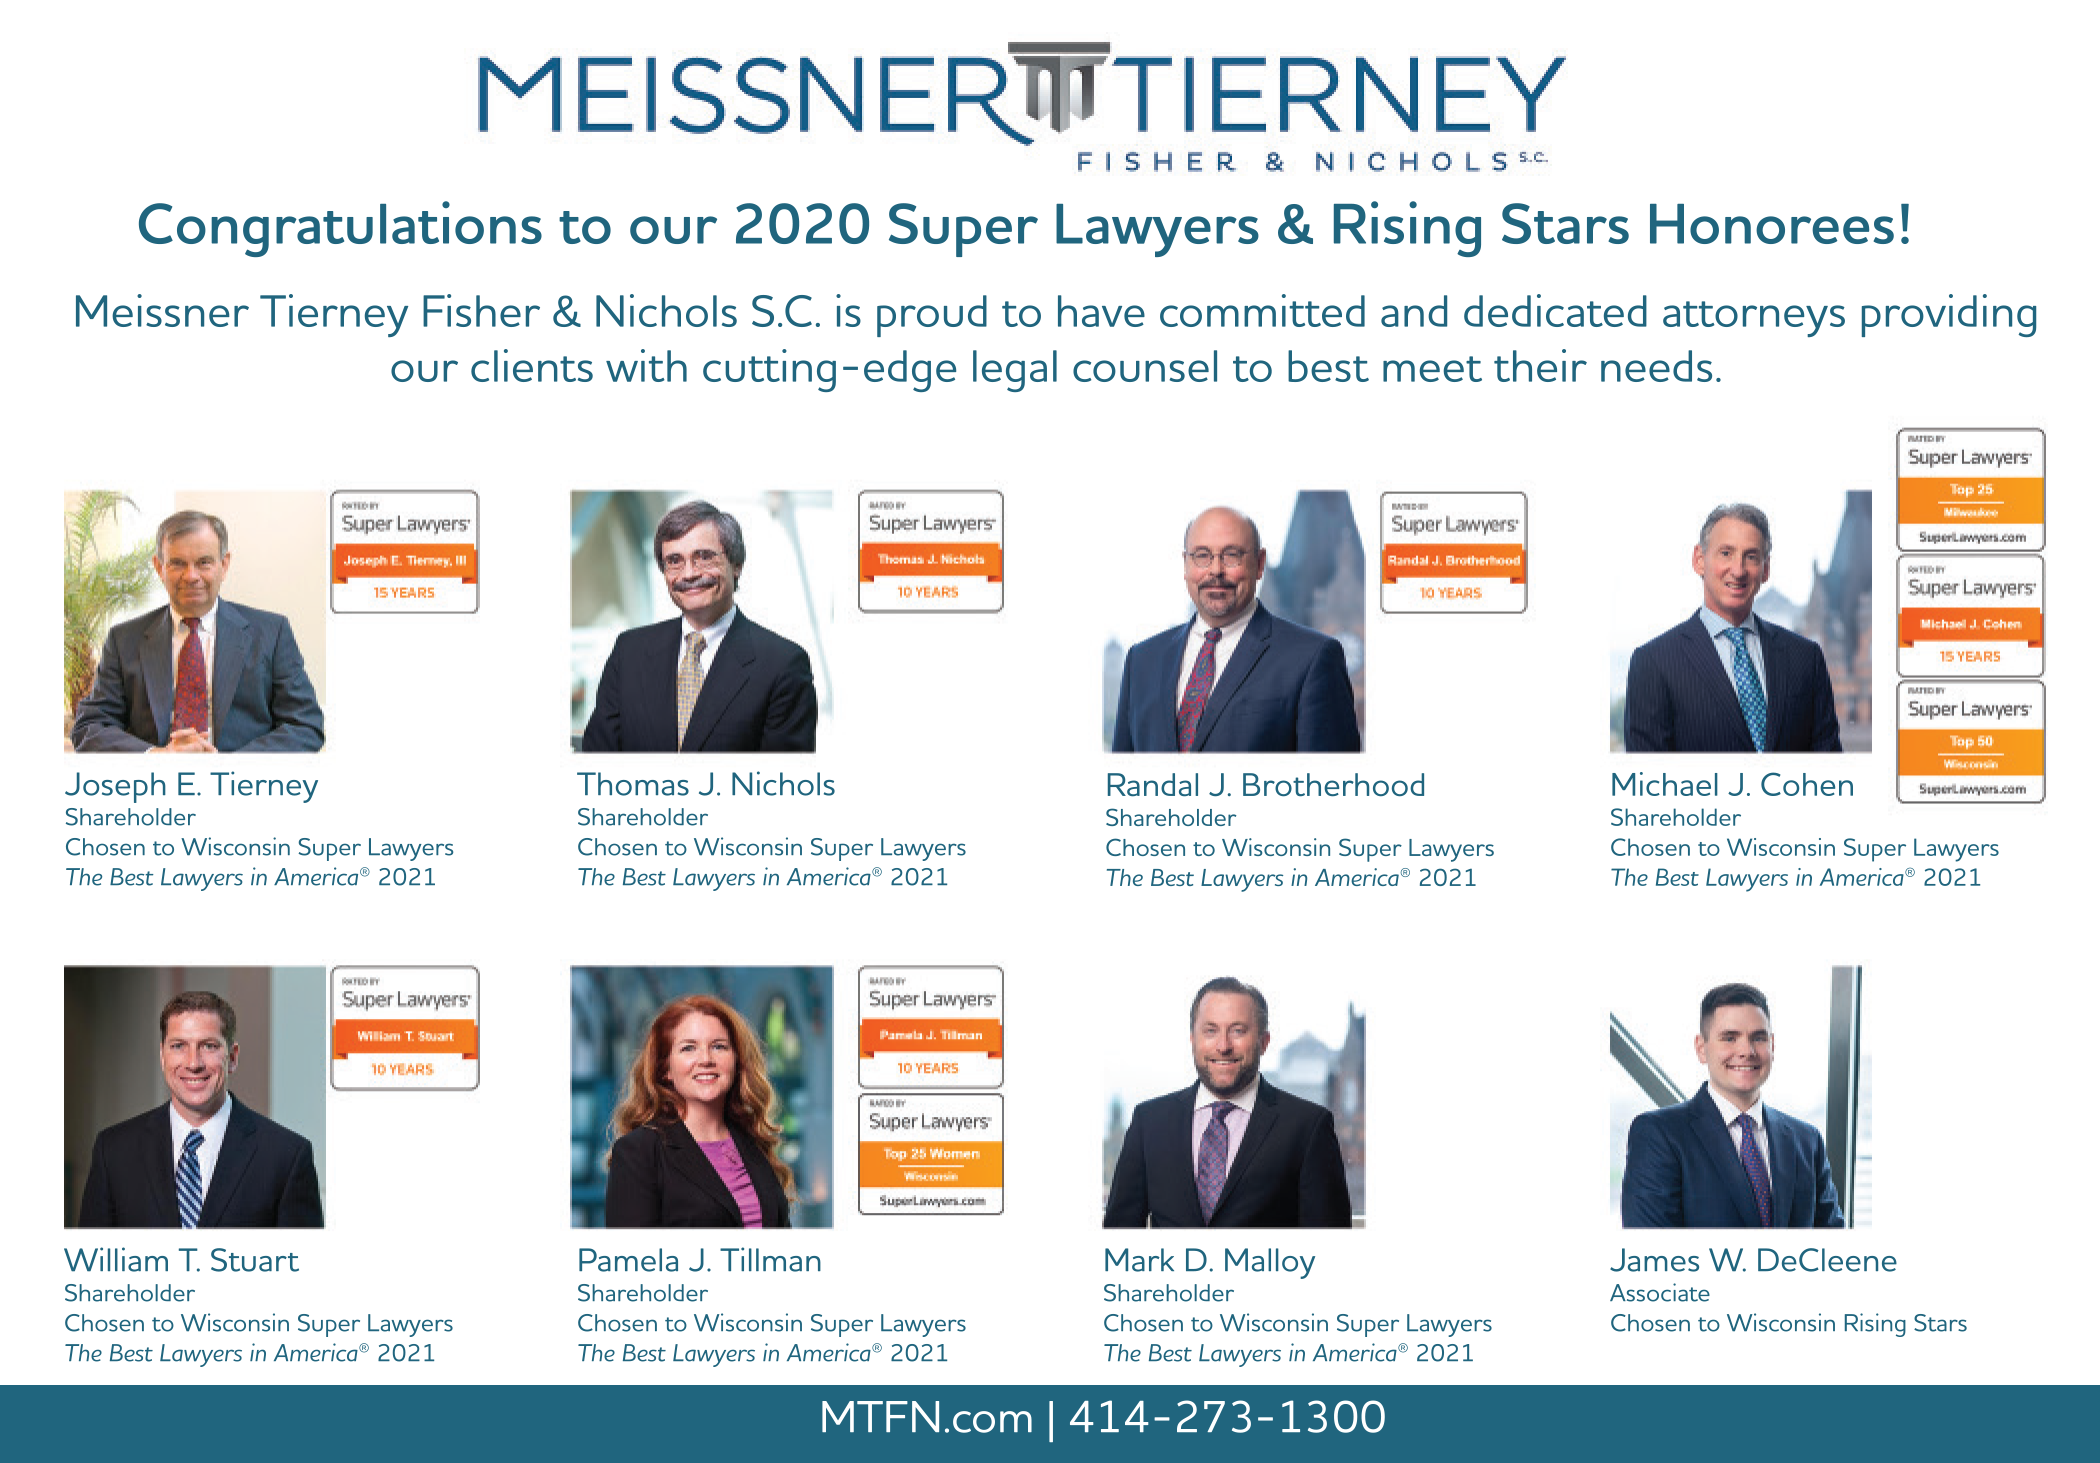 Meissner Tierney Fisher & Nichols S.C. Attorneys Named to 2020